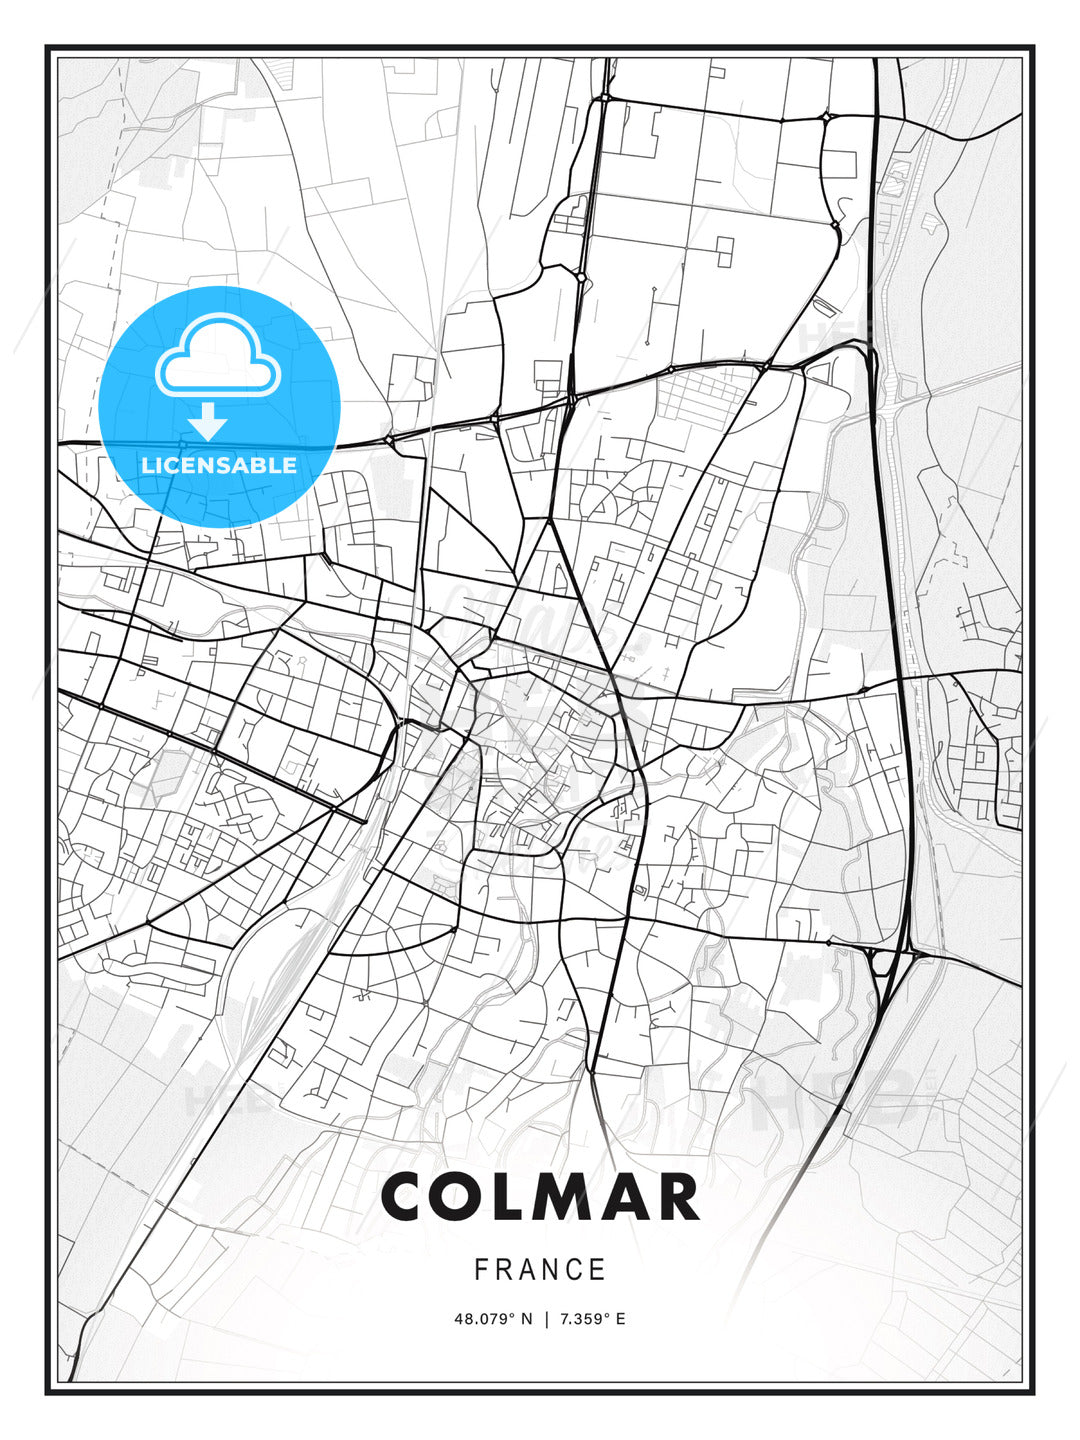 Colmar, France, Modern Print Template in Various Formats - HEBSTREITS Sketches